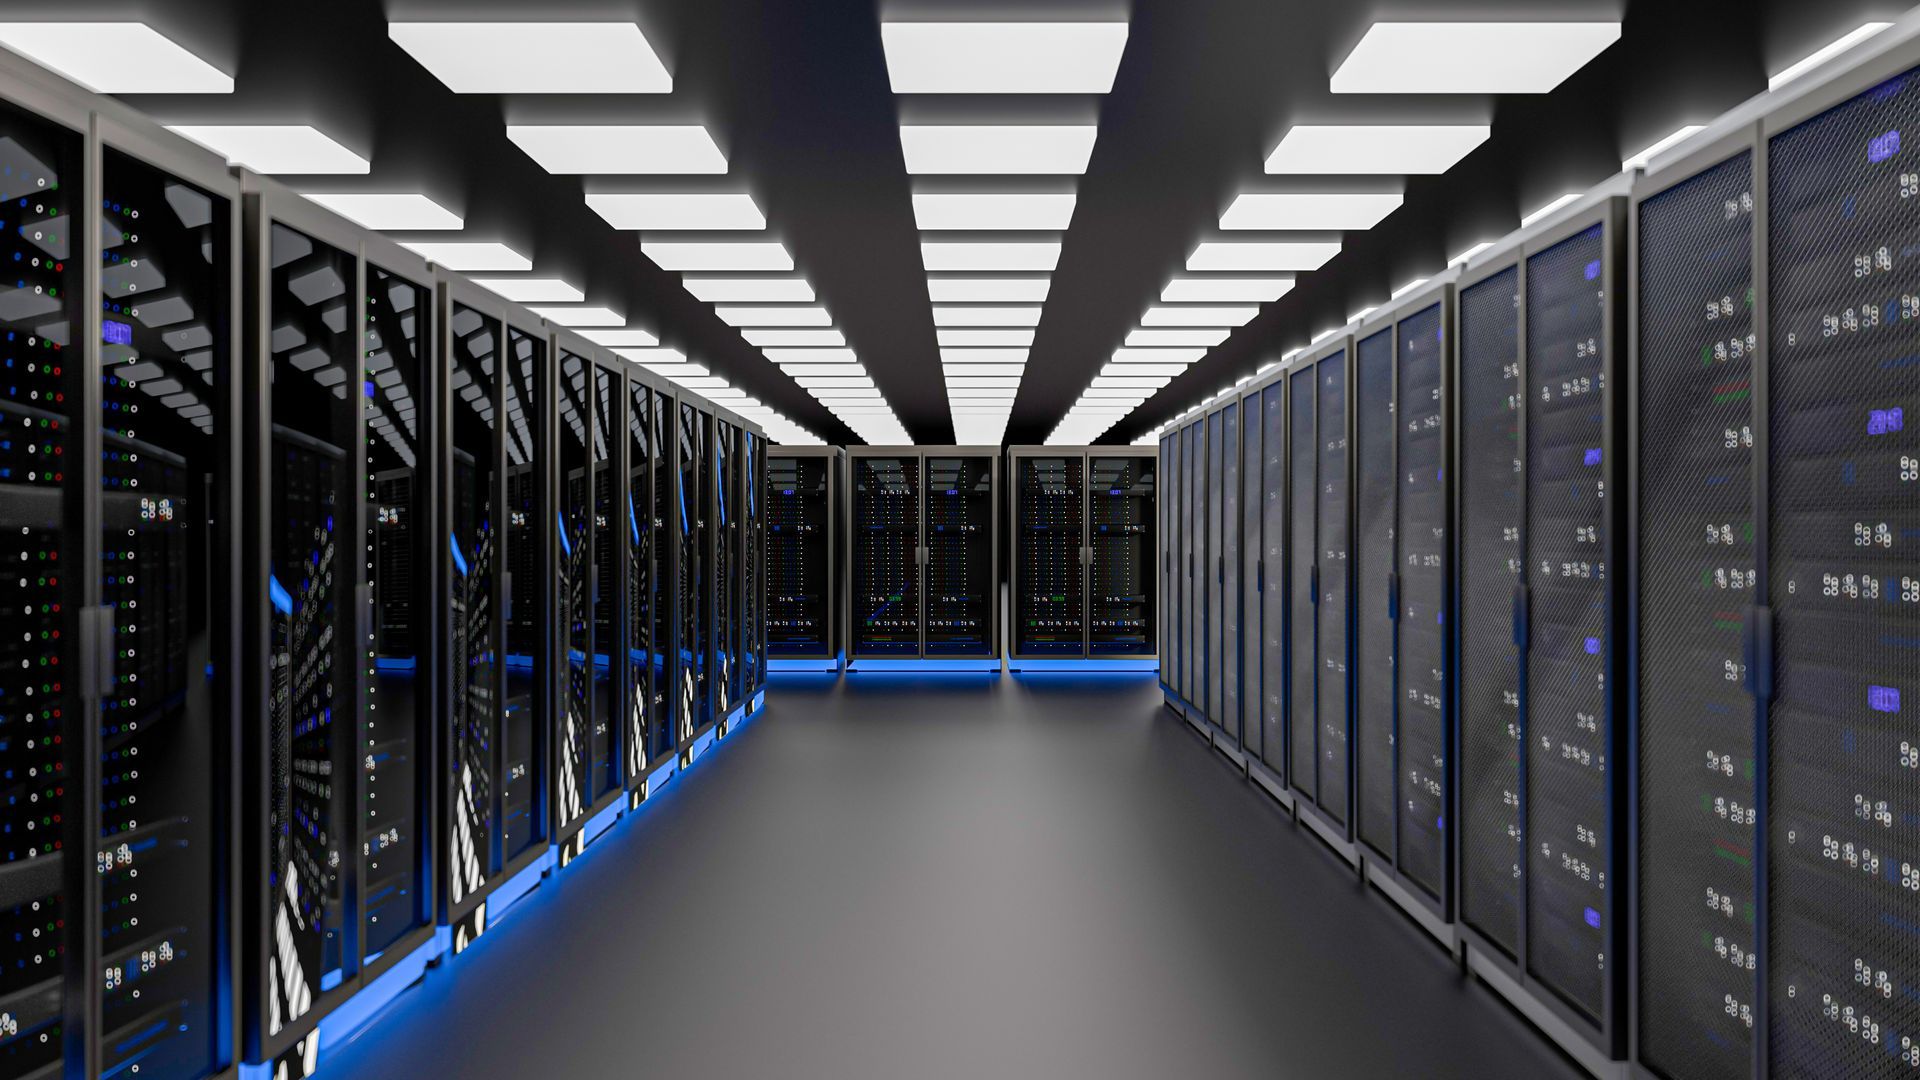 Long hyperscale data center aisle of racks with blue accent lighting